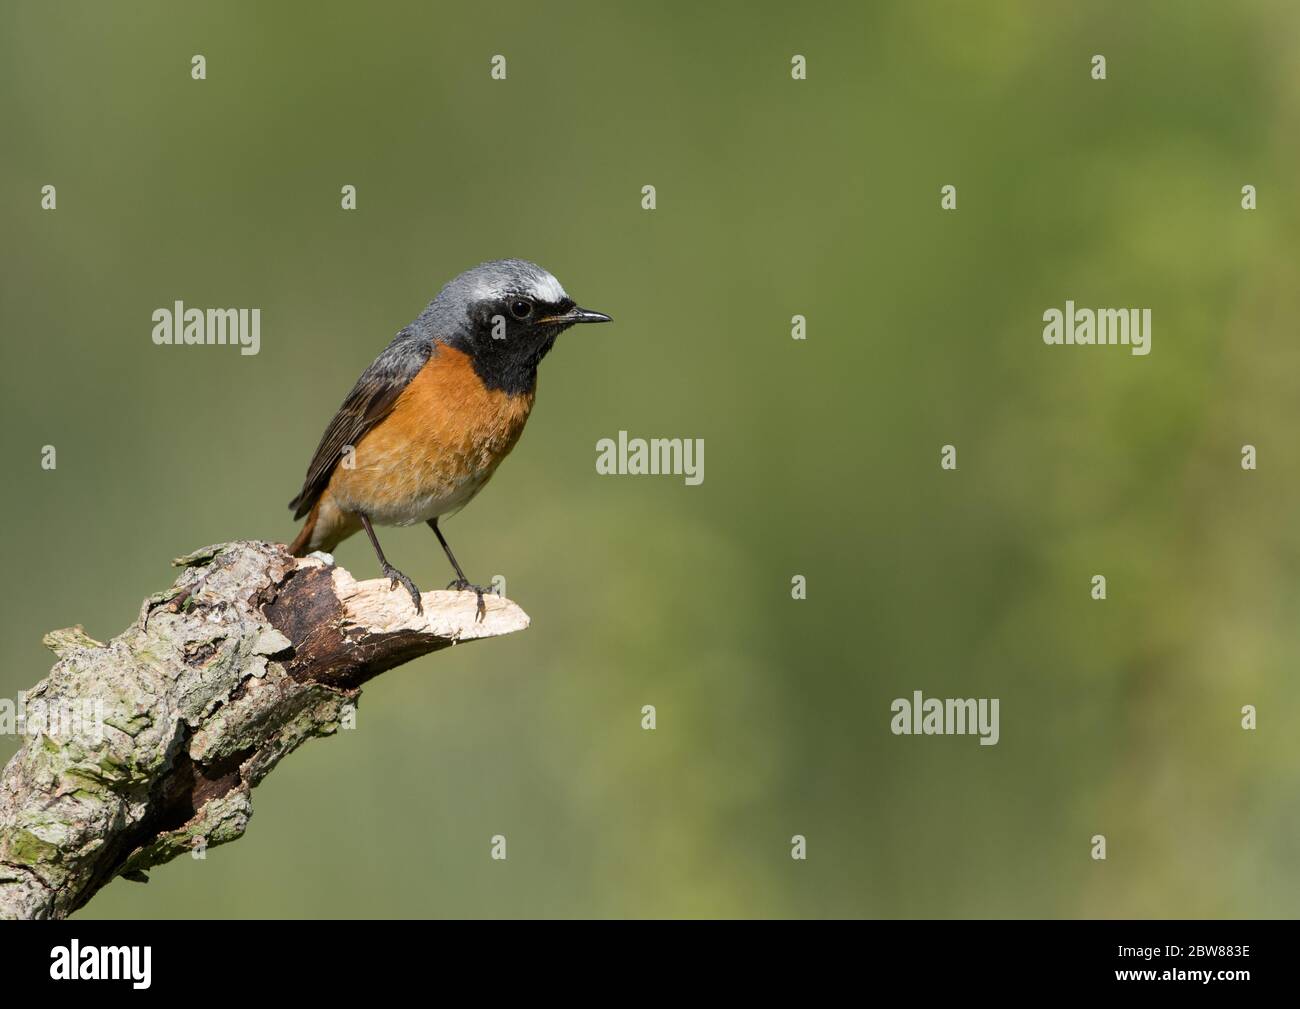 A male Common Redstart (Phoenicurus phoenicurus) in breeding plumage perched in front a clean background. Taken on Cleeve Hill, Gloucestershire, UK. Stock Photo